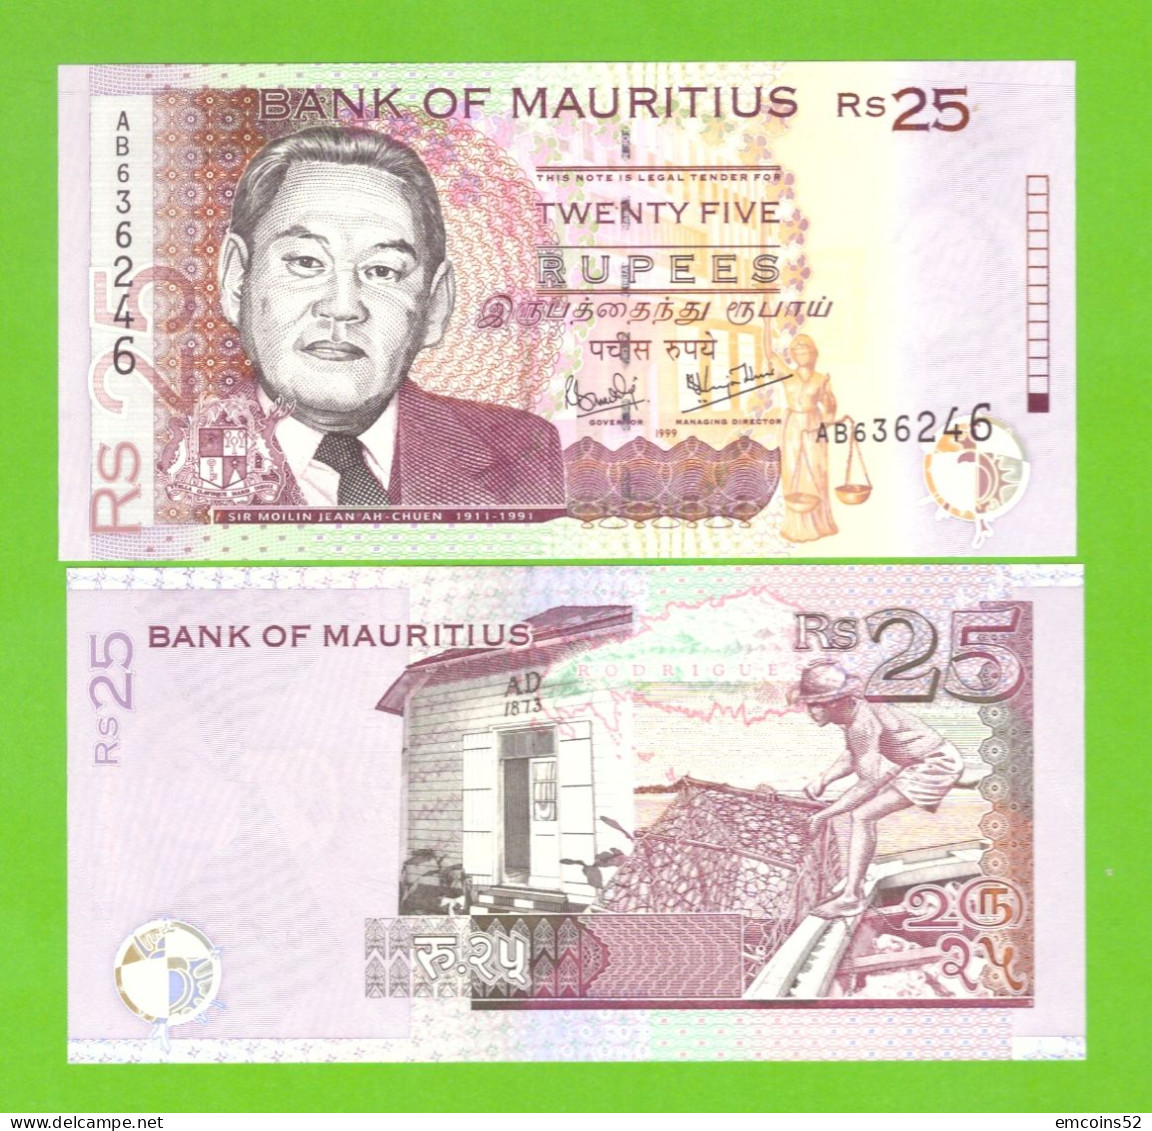 MAURITIUS 25 RUPEES 1999 P-49a UNC - Maurice